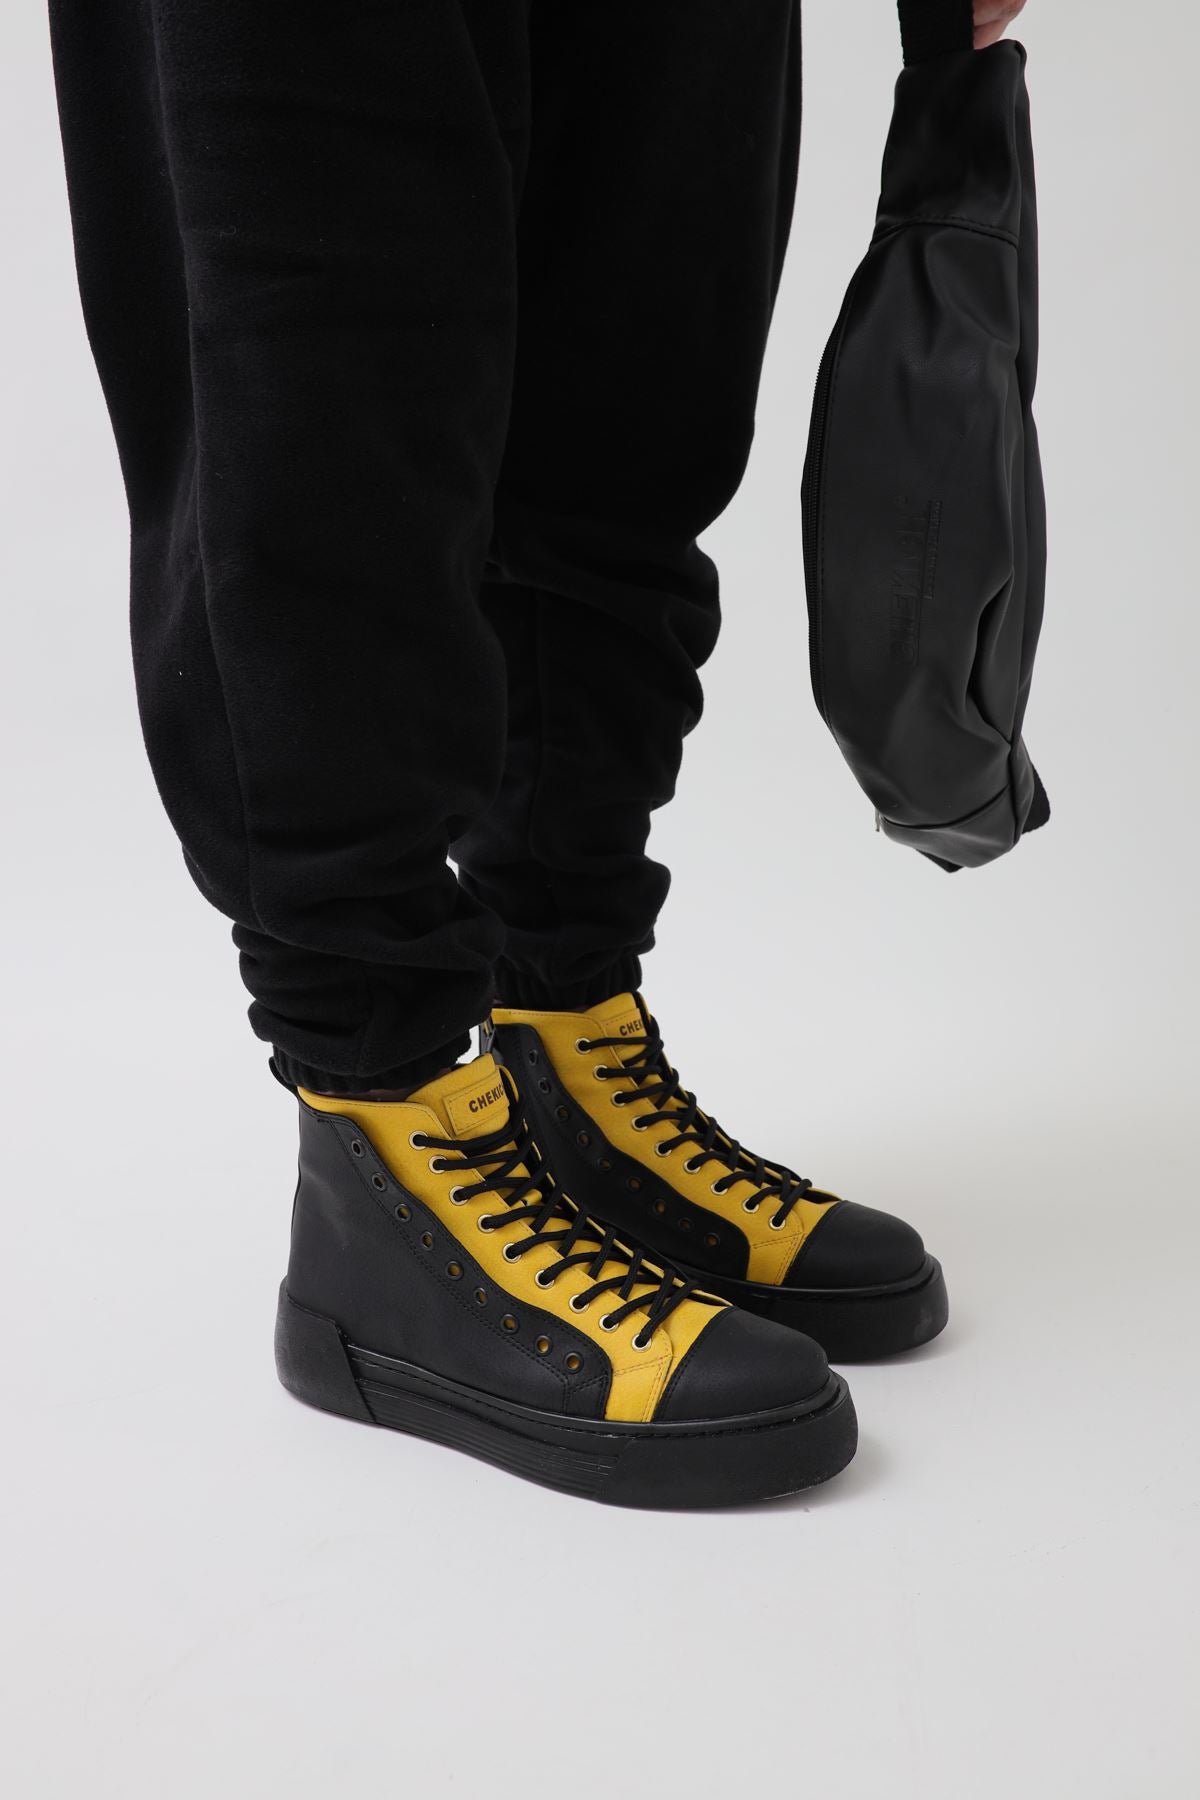 CH167 ST Men's Boots BLACK - YELLOW - STREETMODE™